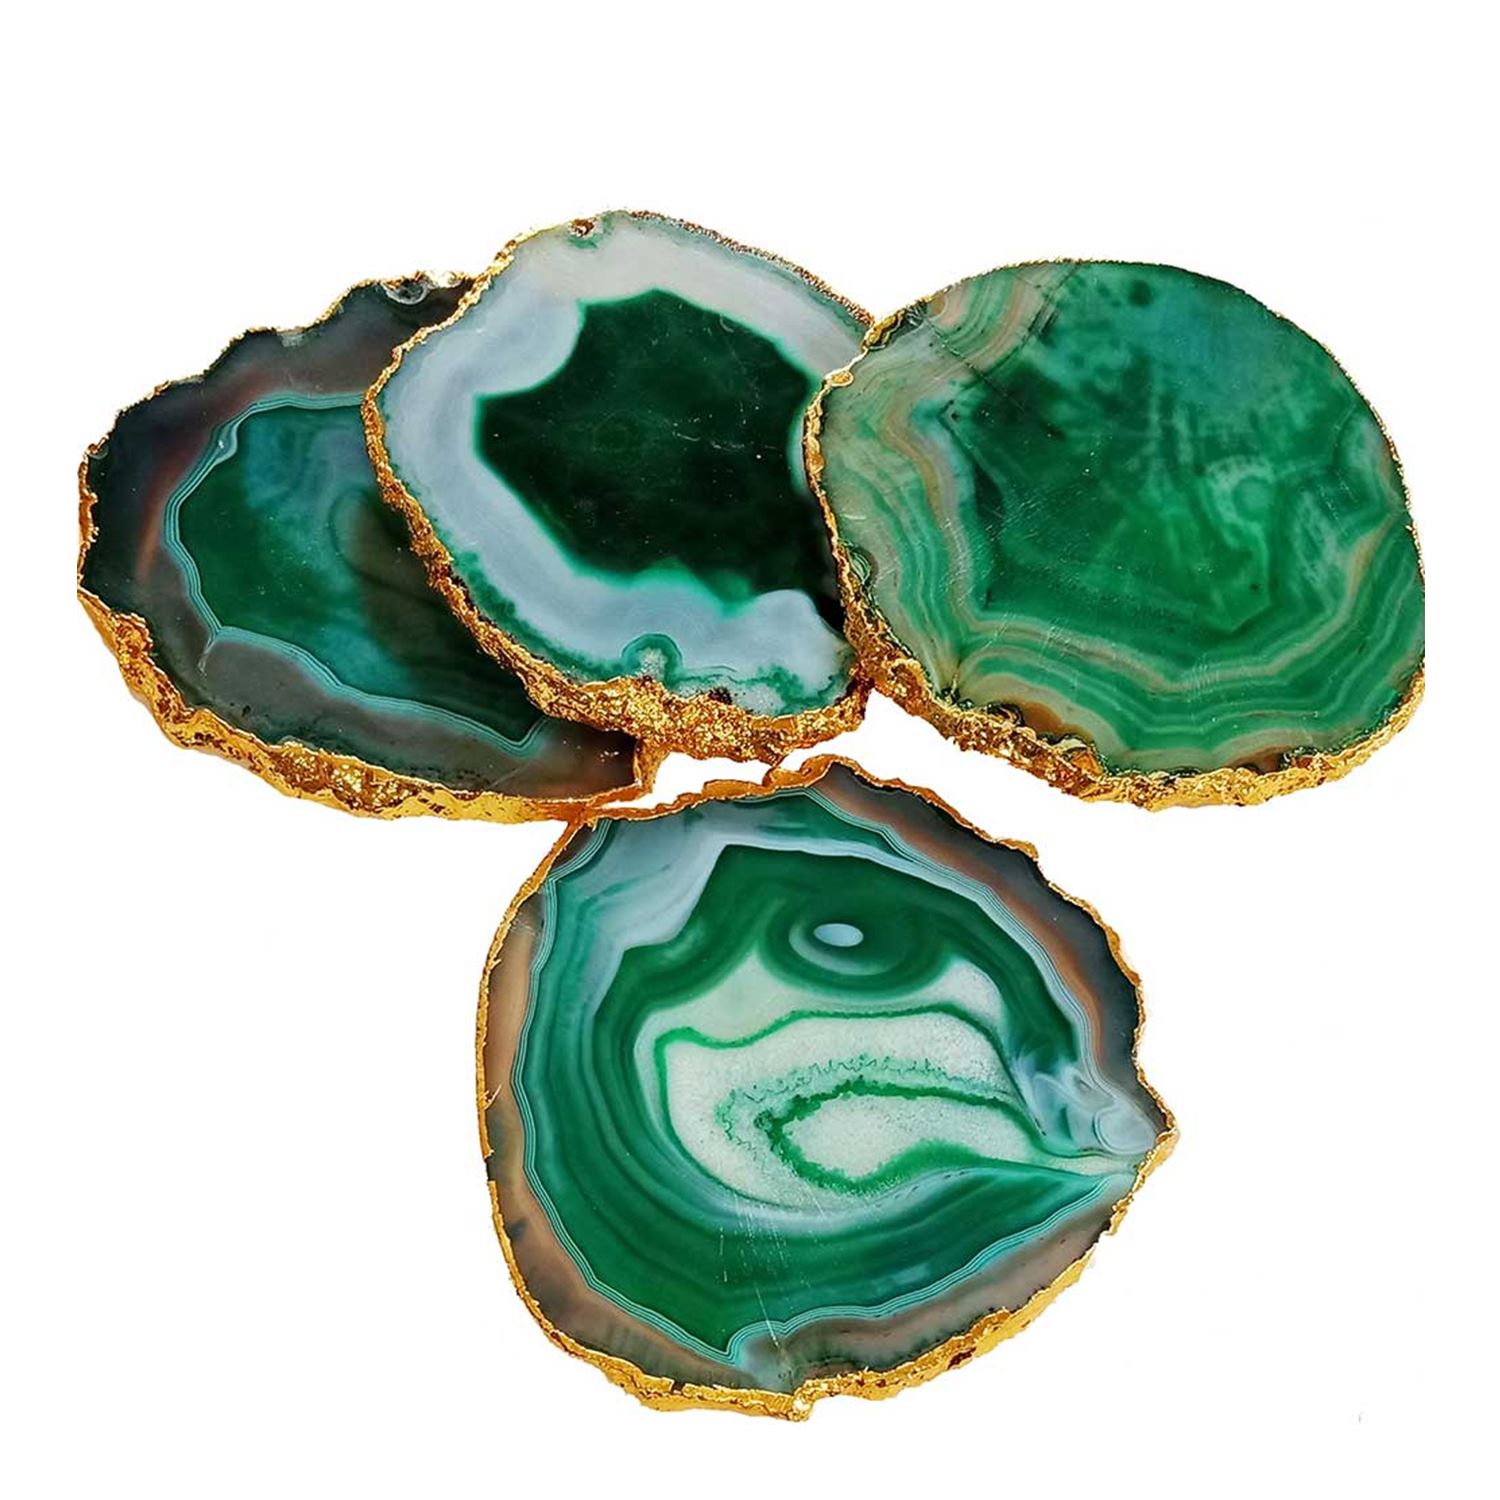 agate-coasters-slices-green